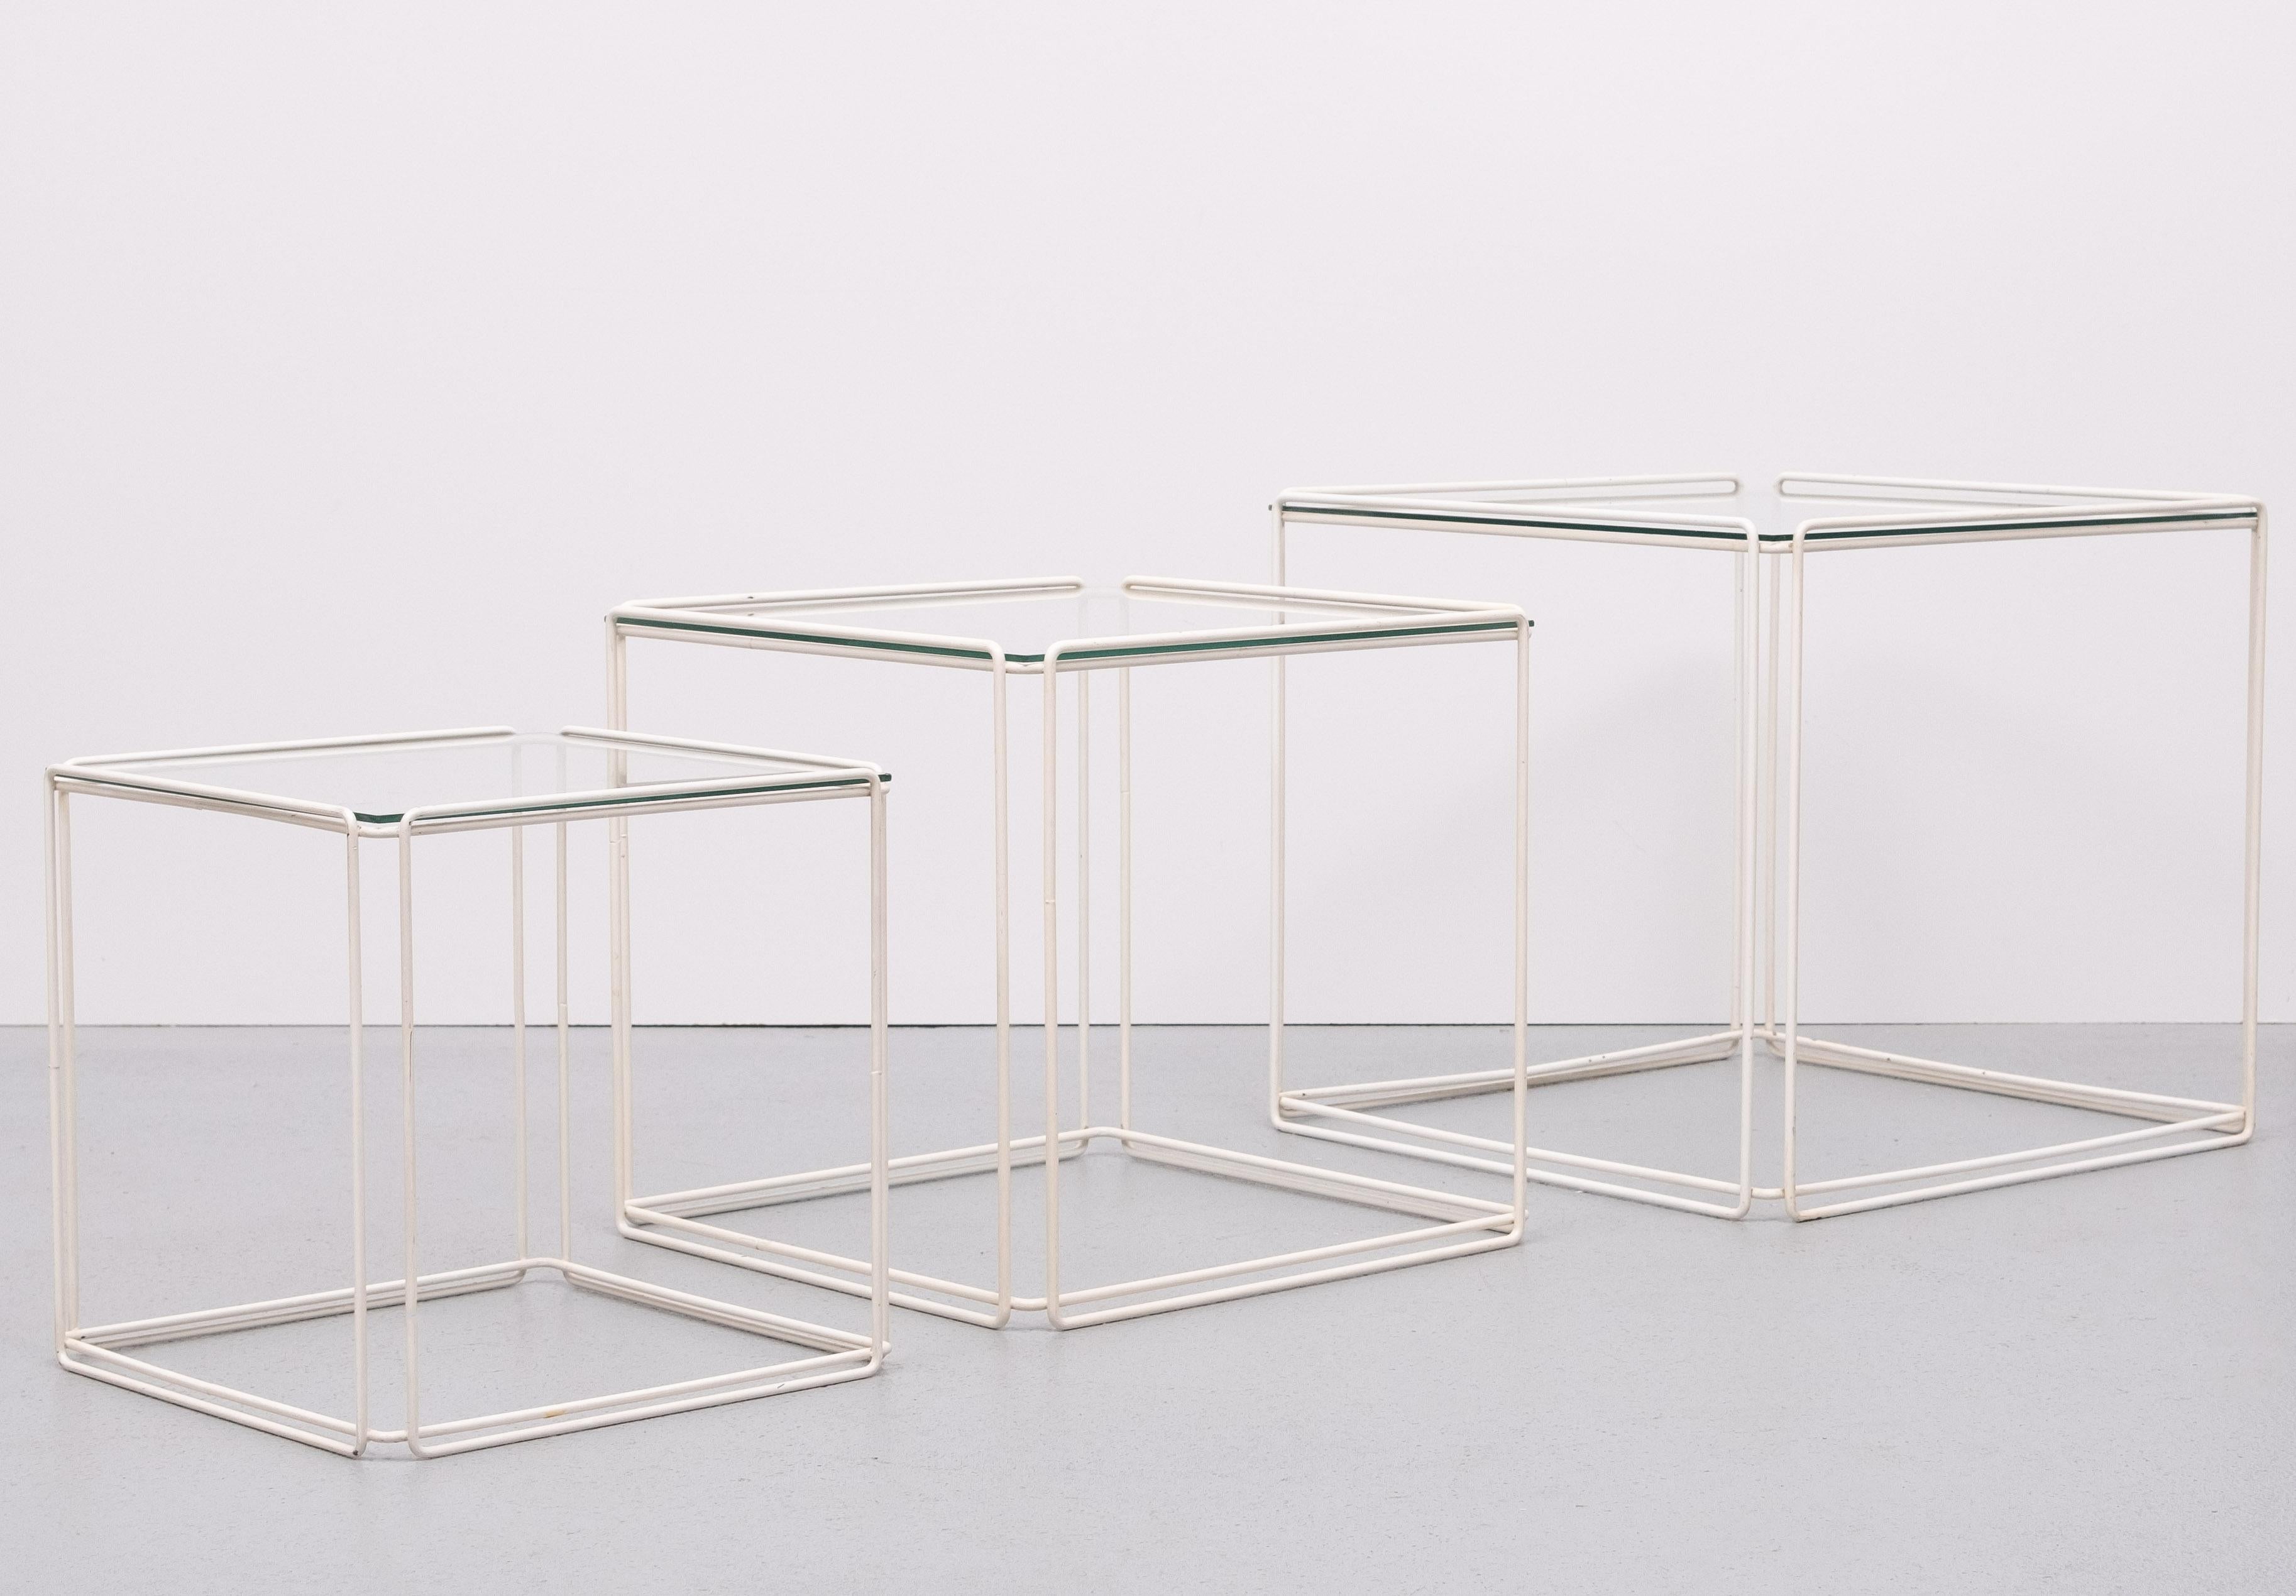 Metallic Thread Graphical ''Isocele''  Nesting Tables by Max Sauze   1970s  France  For Sale